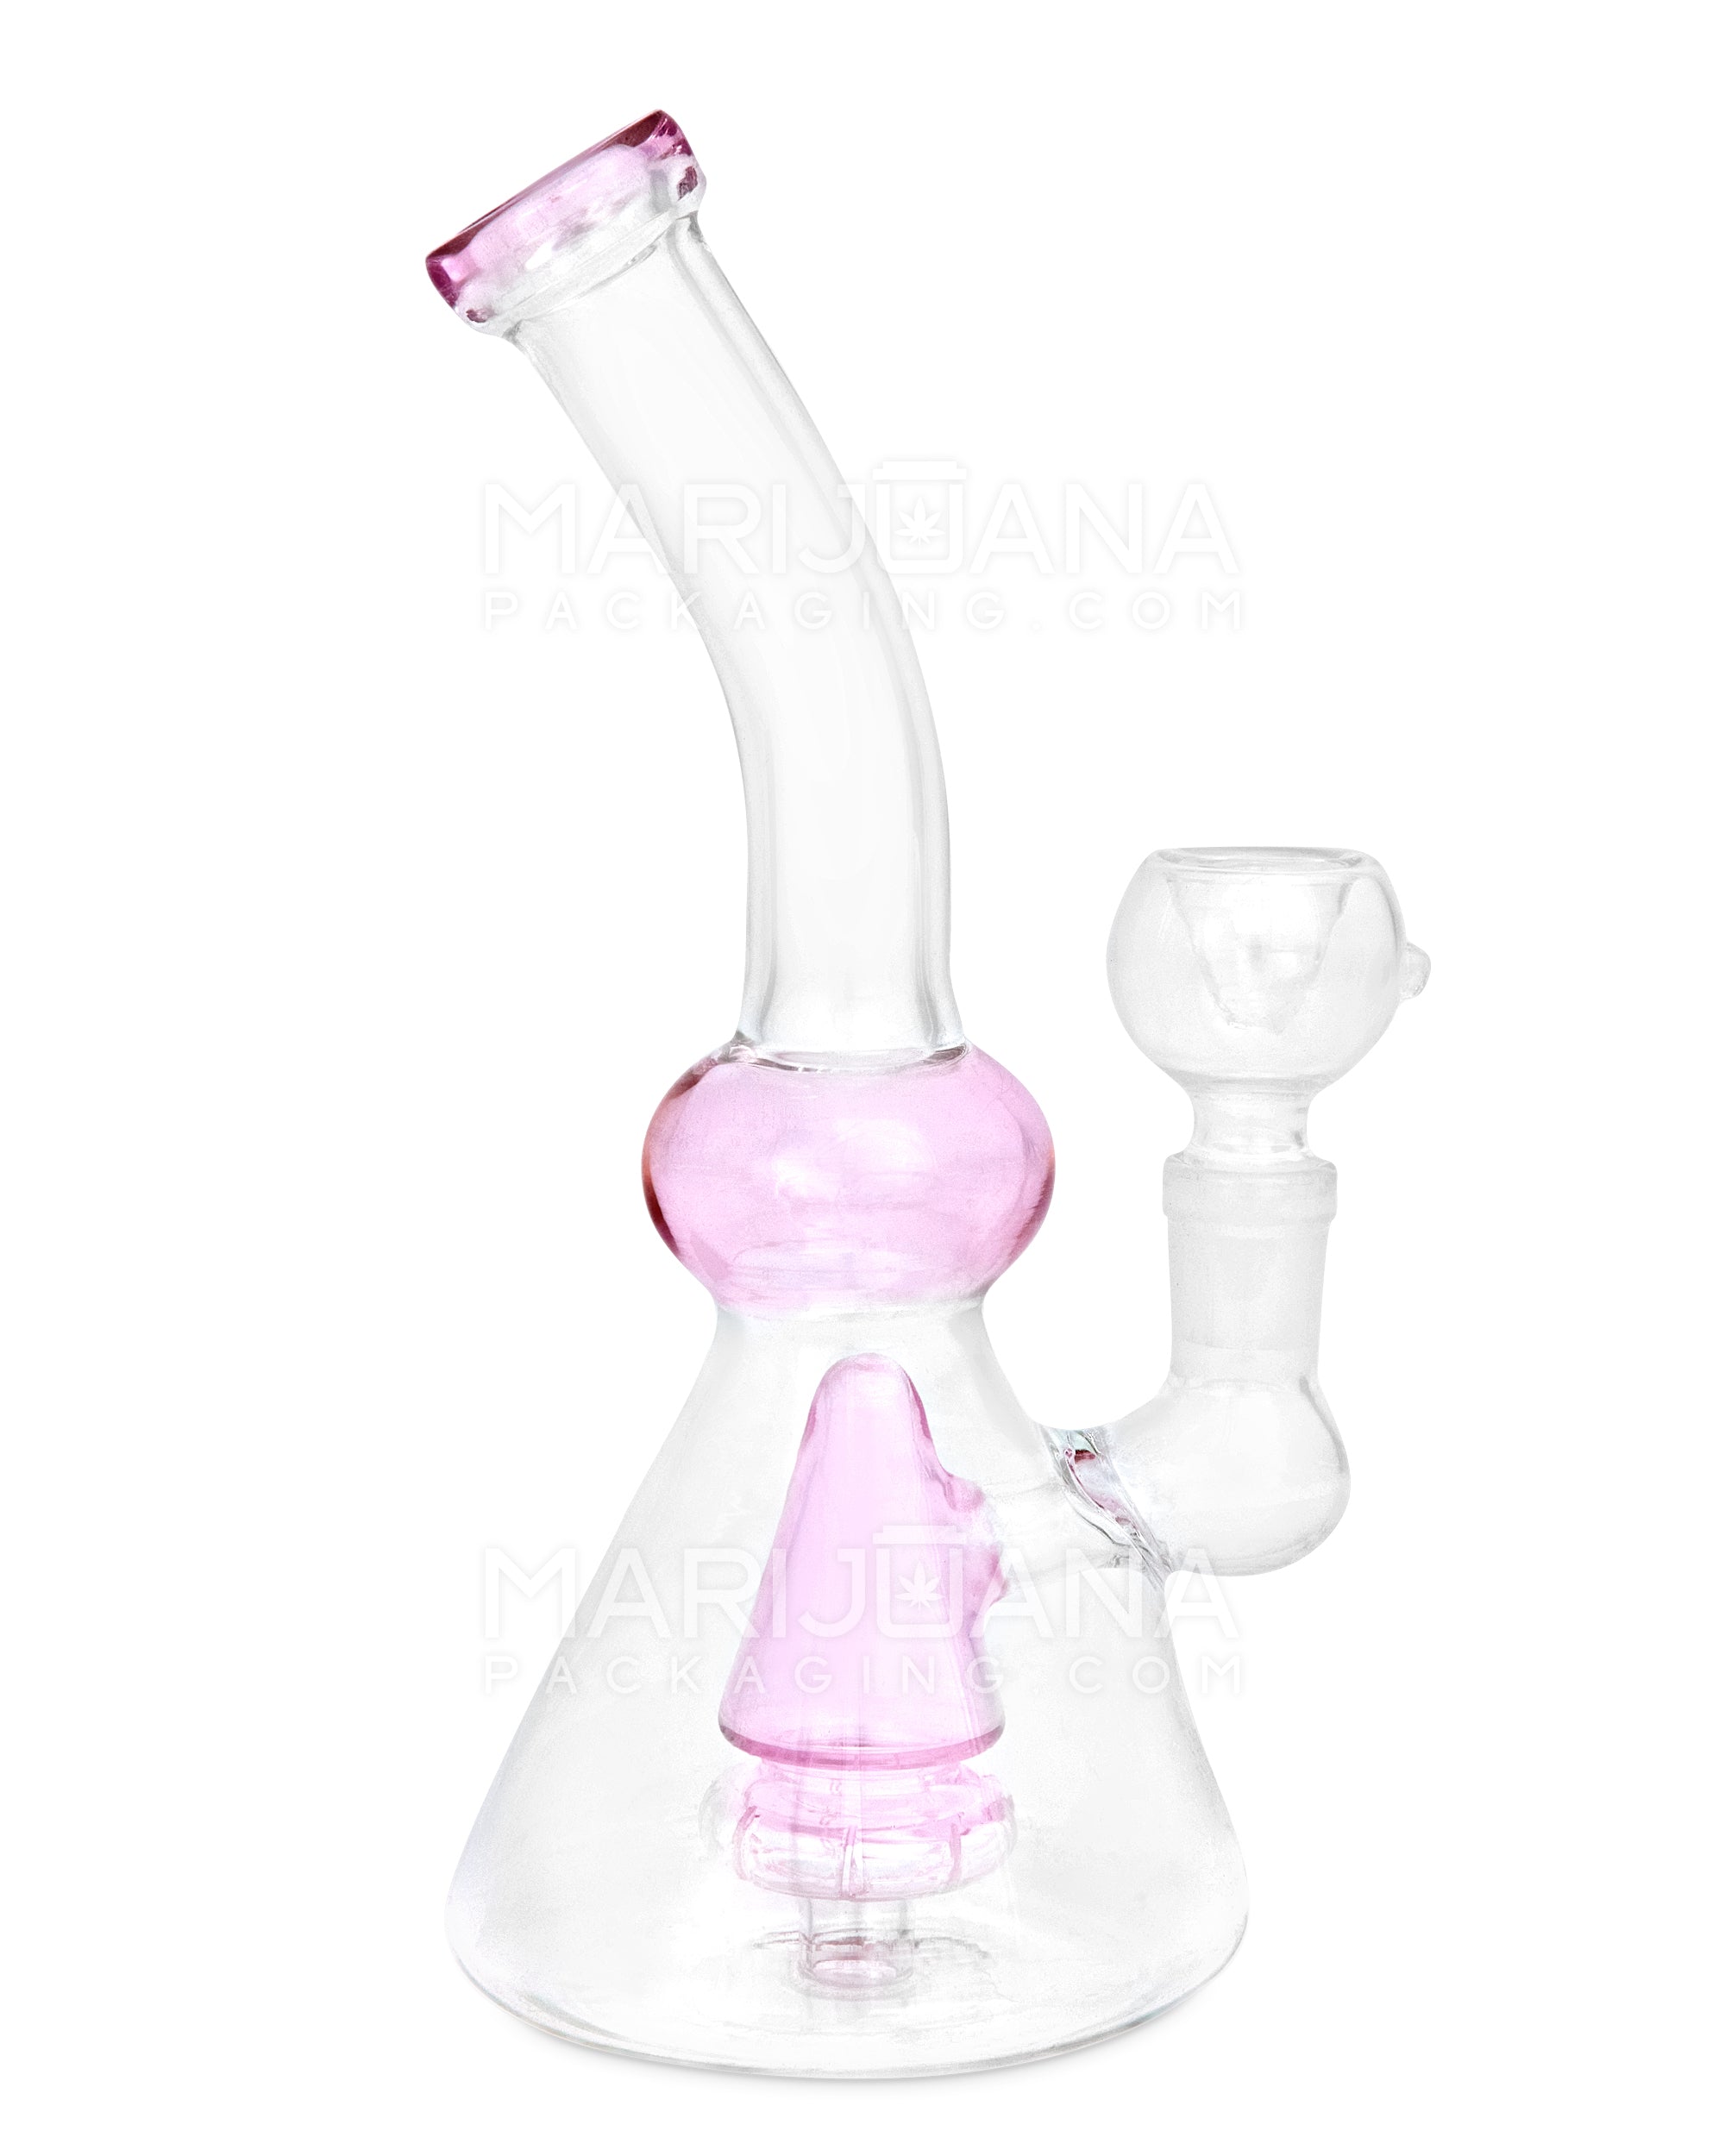 Bent Neck Showerhead Perc Glass Beaker Water Pipe | 7in Tall - 14mm Bowl - Pink - 1